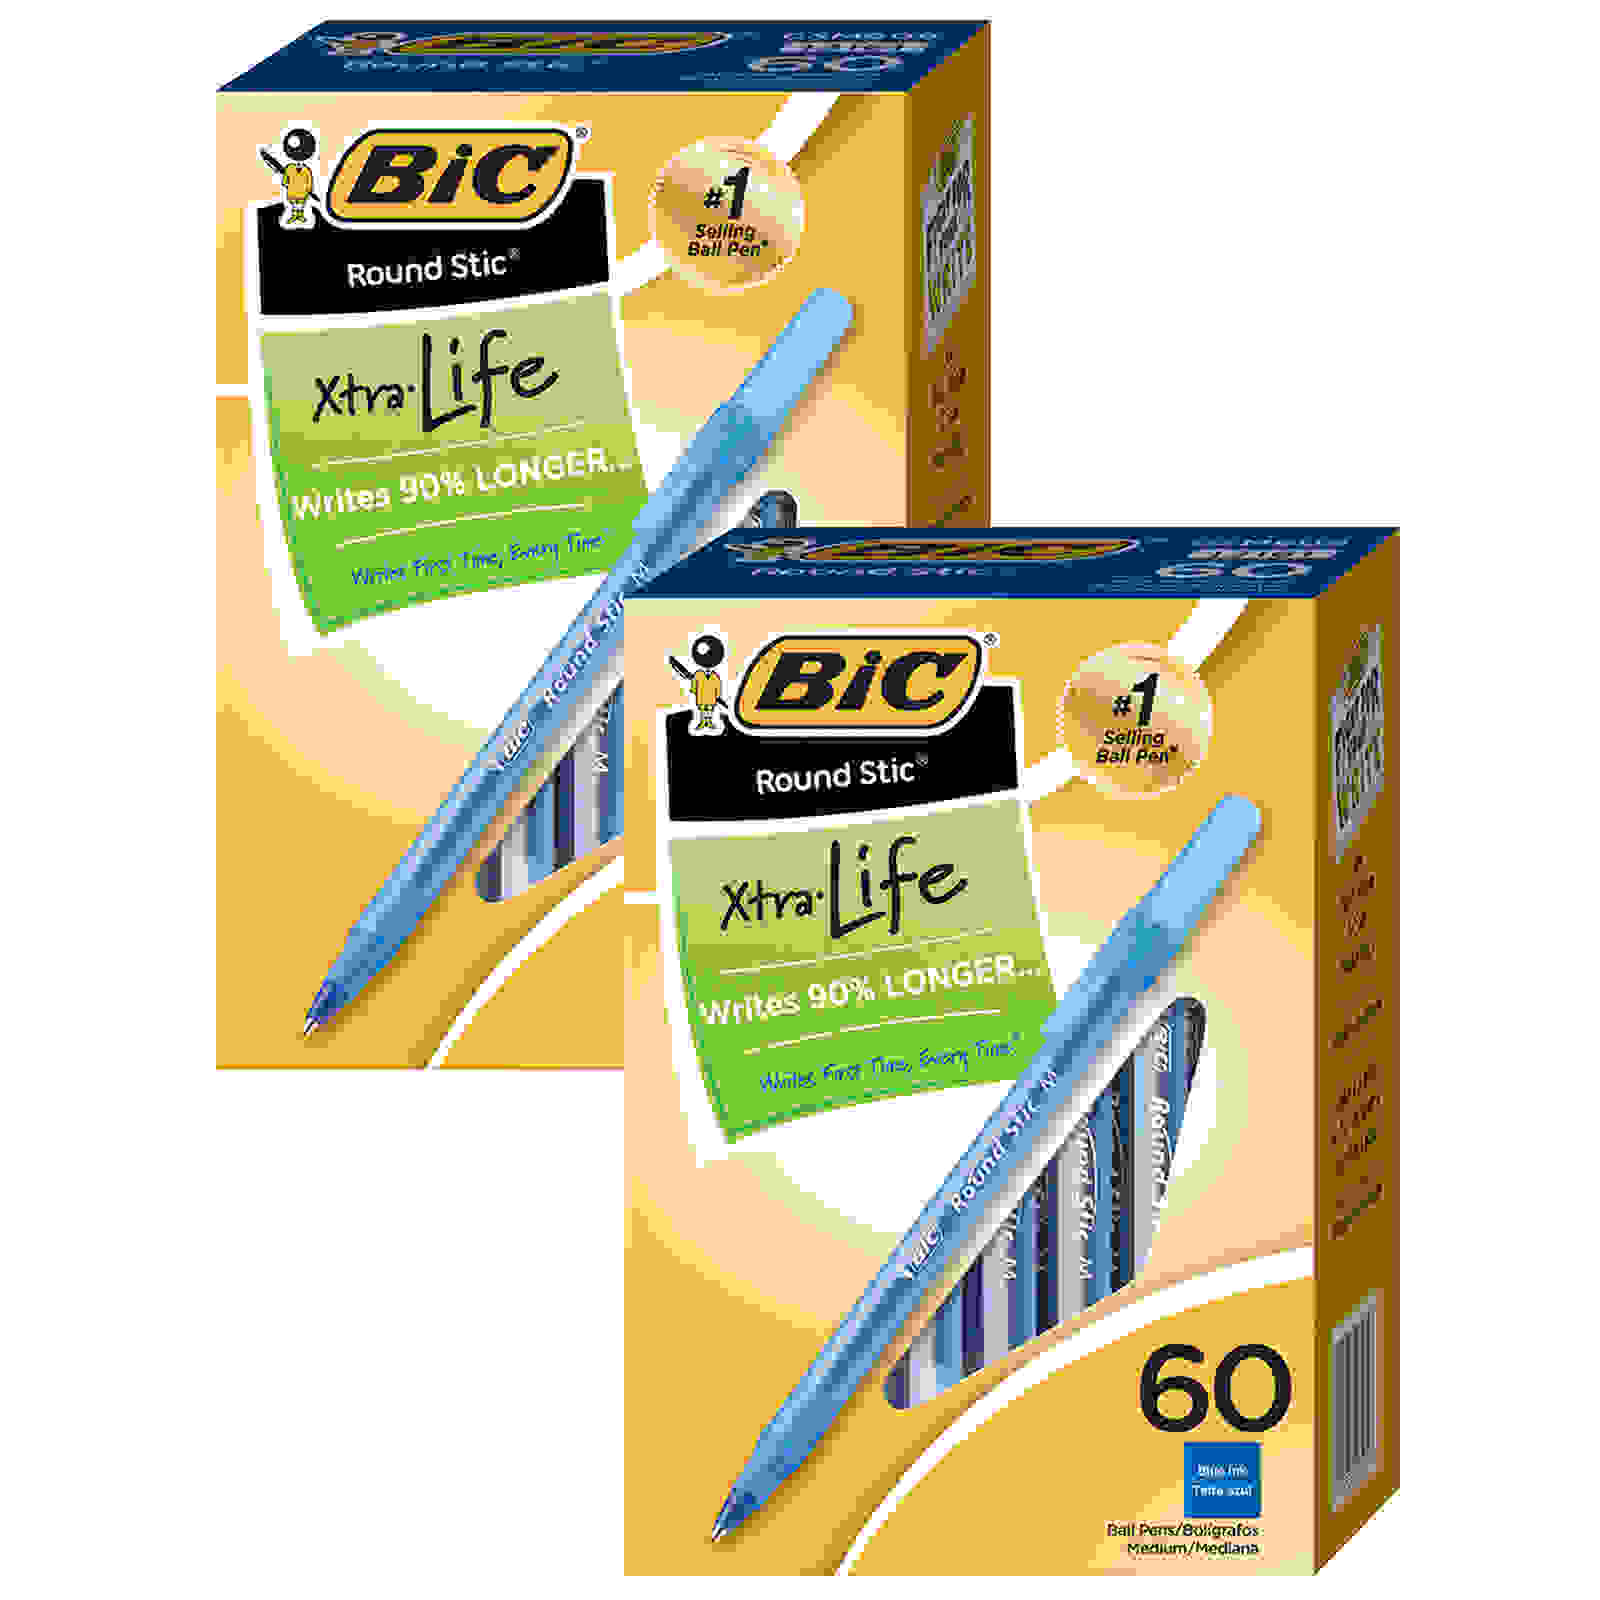 Round Stic Xtra Life Ball Pen, Blue, 60 Per Pack, 2 Packs